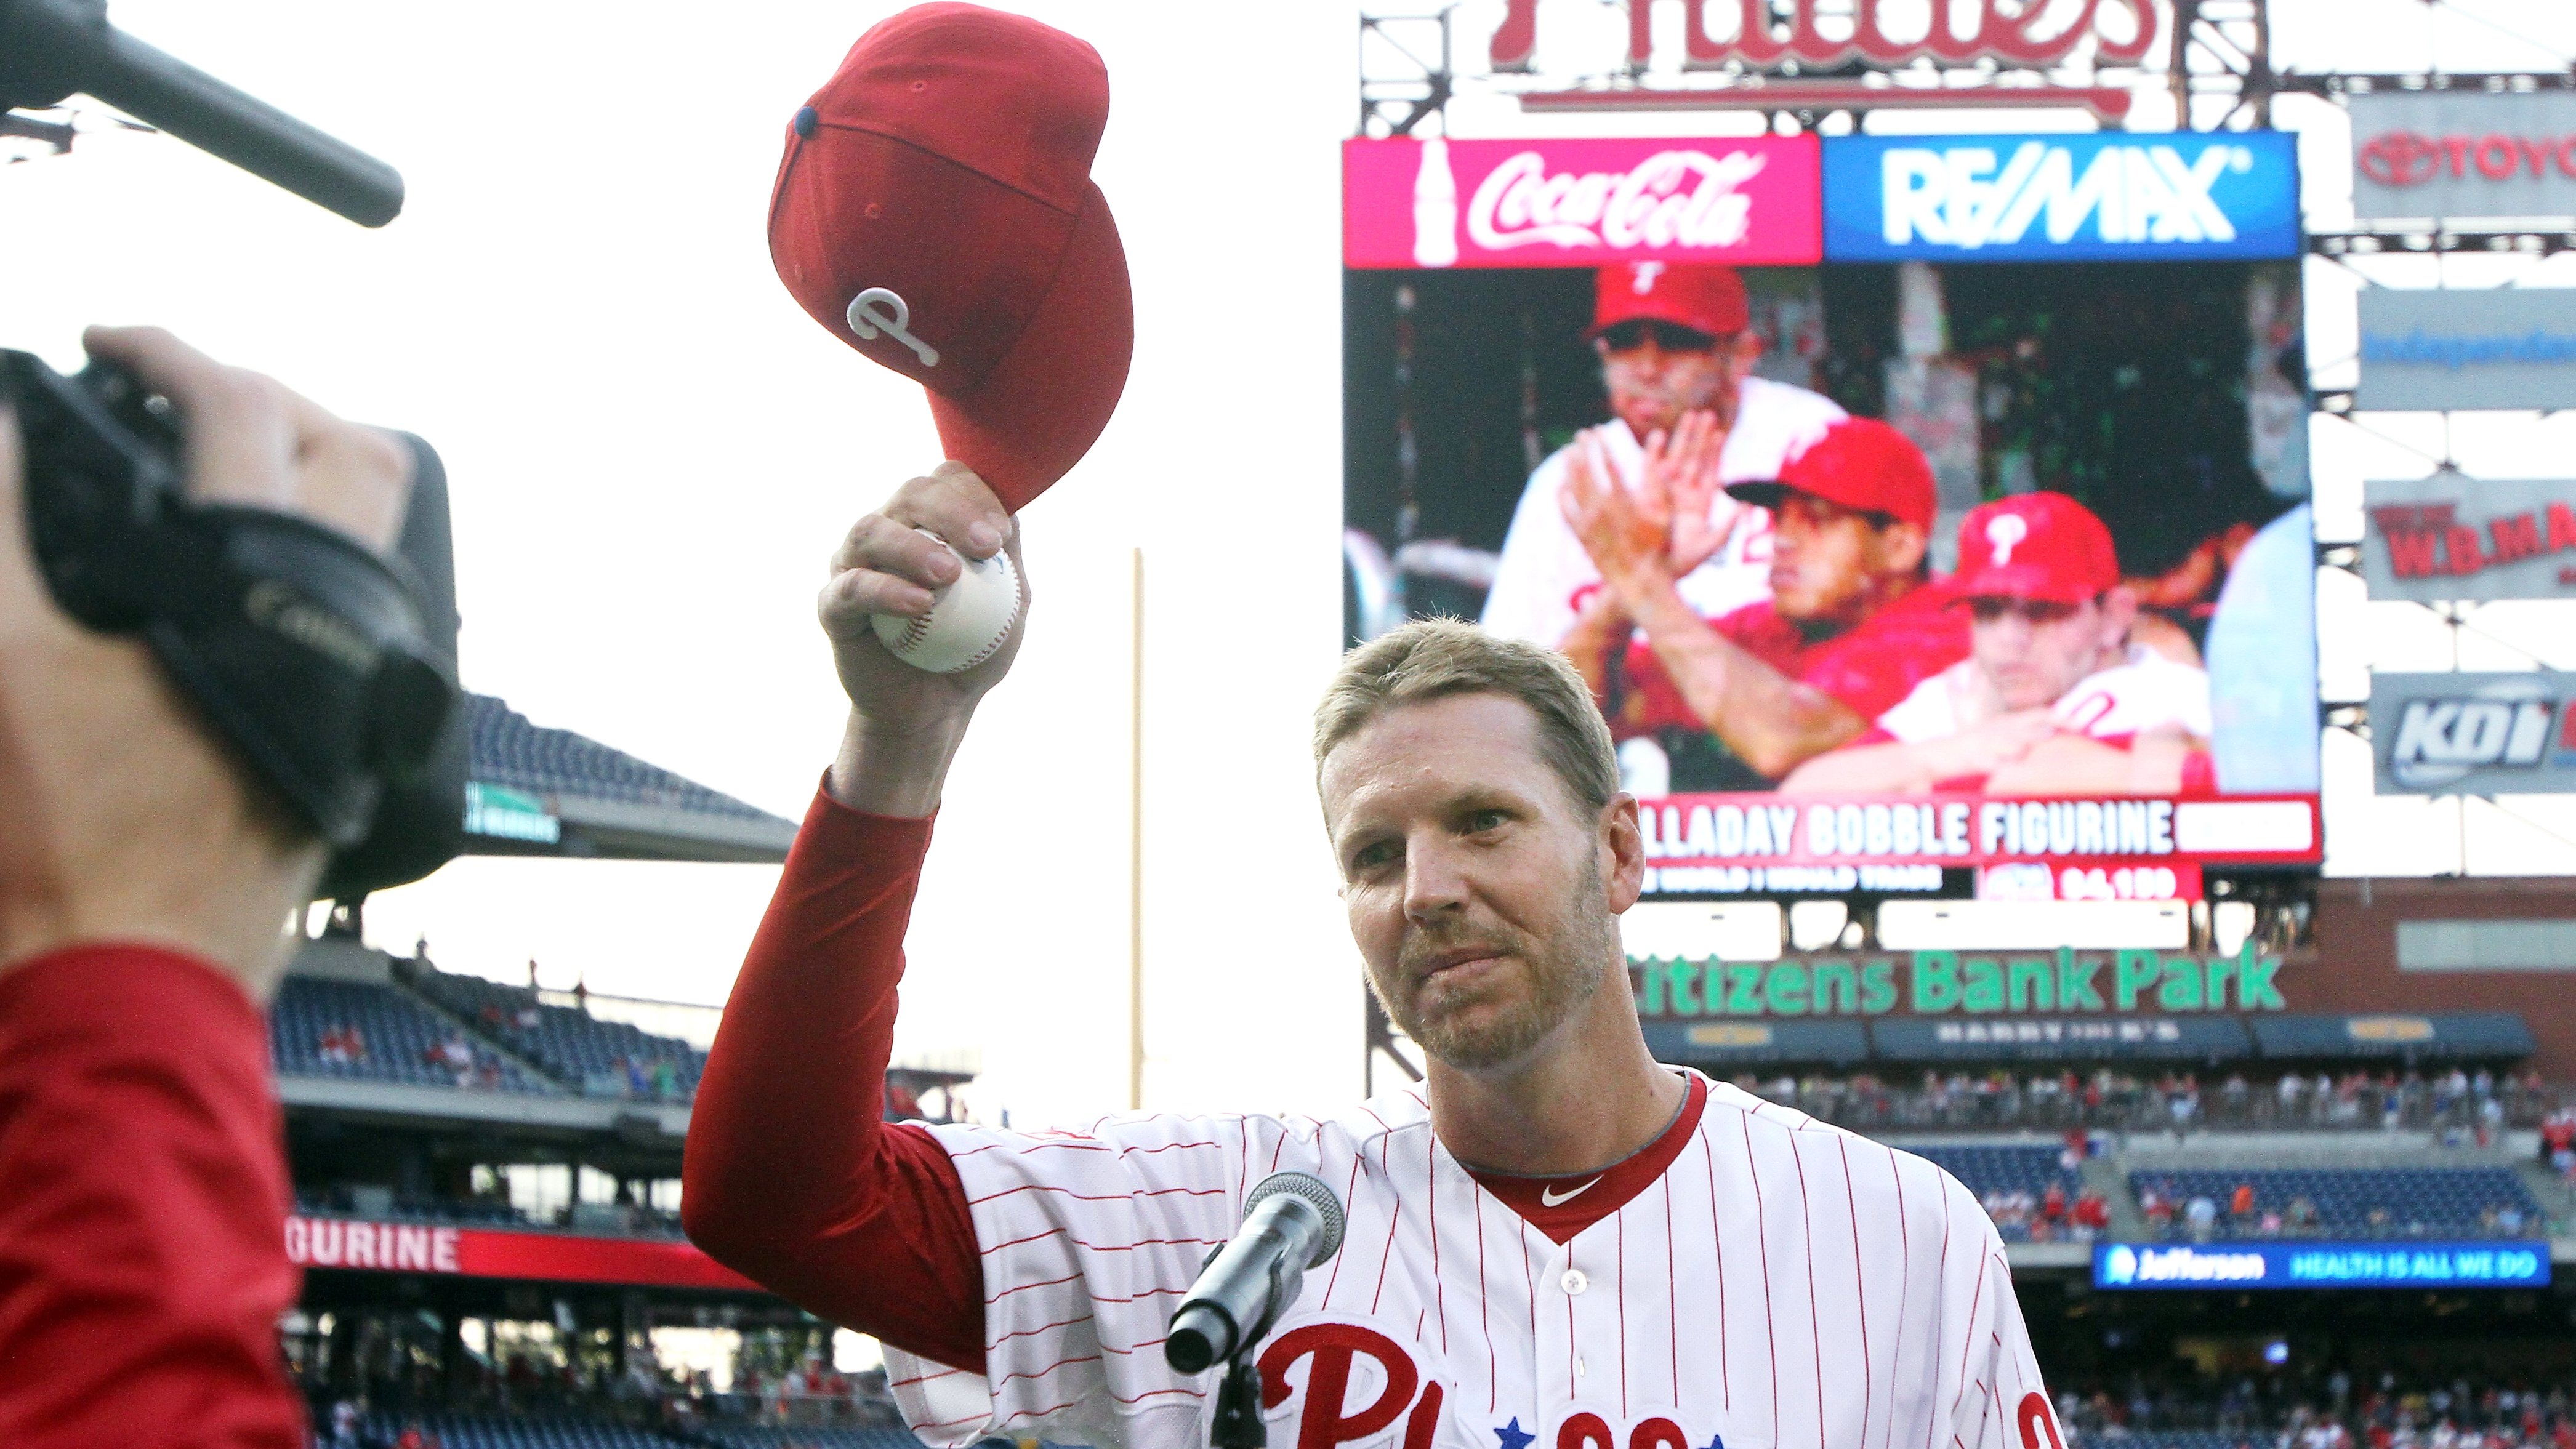 Phillies' Halladay Opens Playoffs With No-Hitter - The New York Times